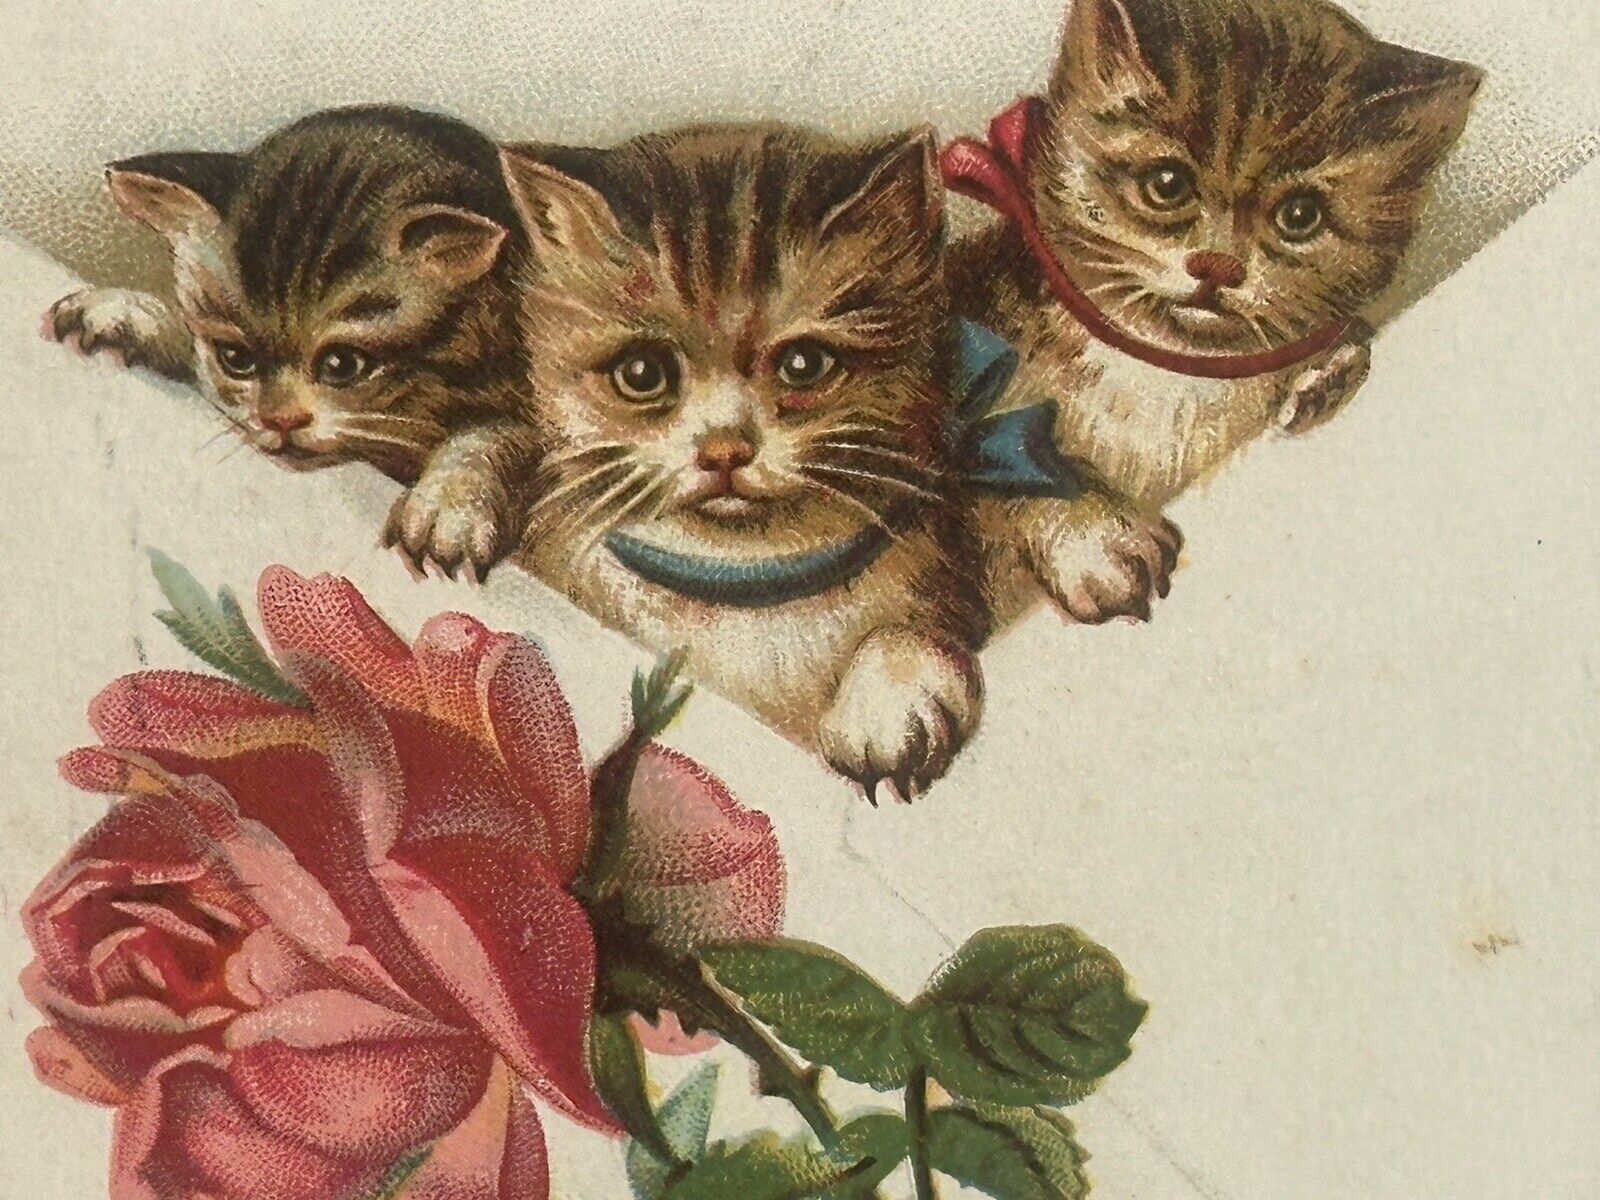 Cat Postcard Three Kittens In The Mail Envelope Pink Rose Wear Bows